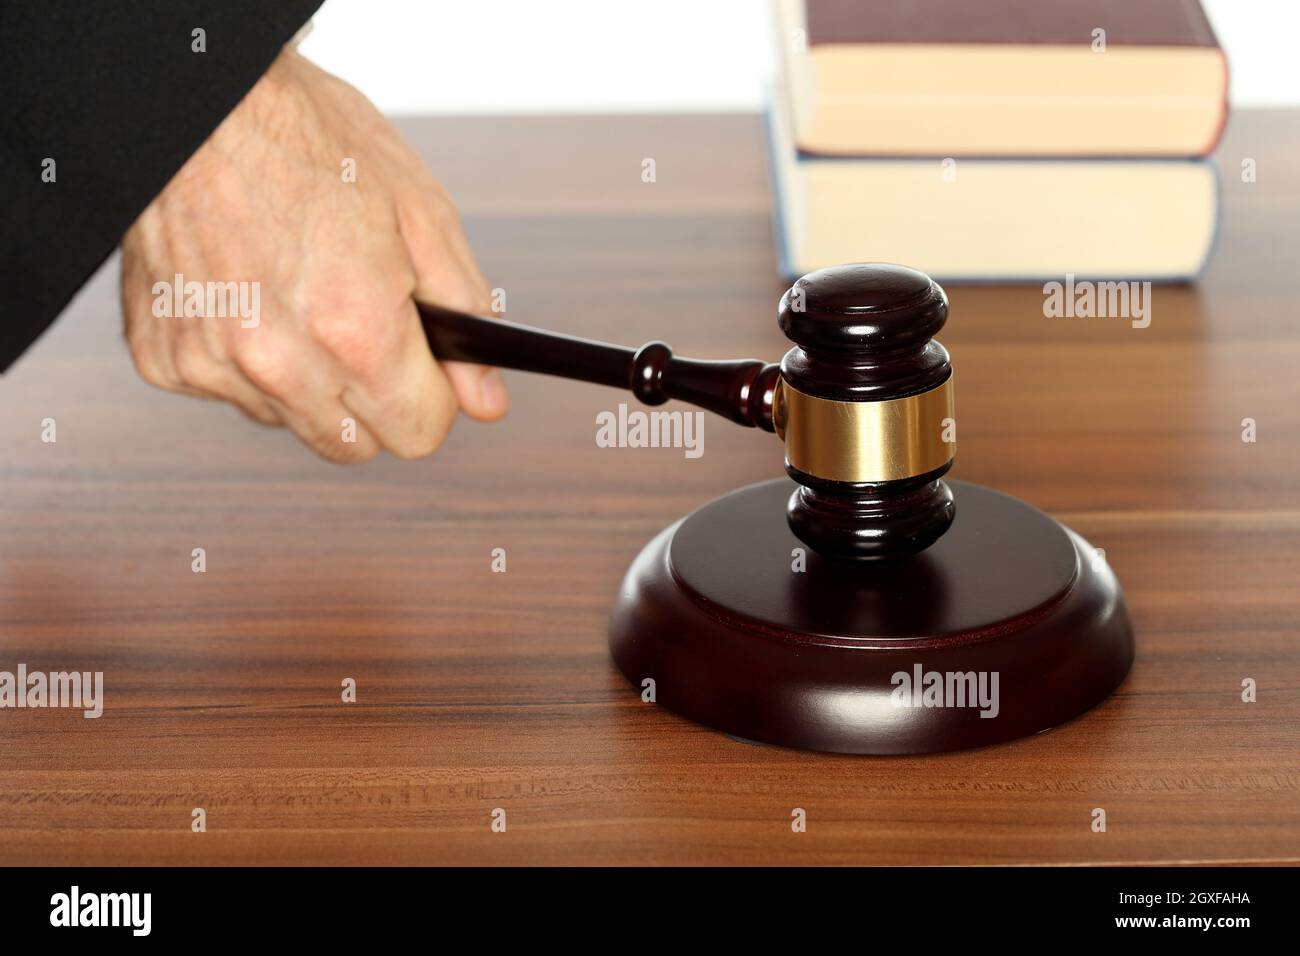 gavel on a desk, law and rights symbol Stock Photo